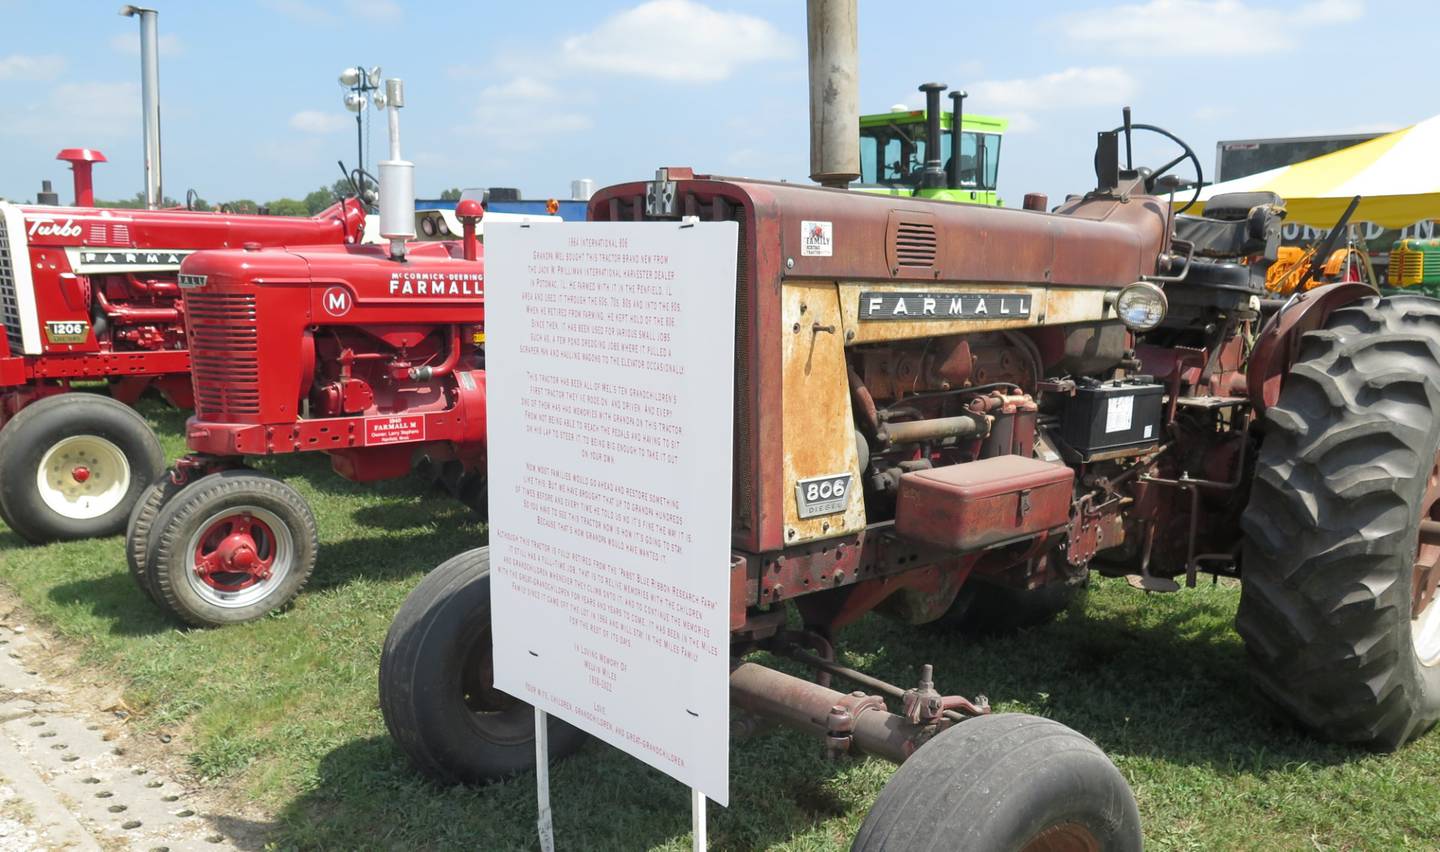 Every tractor has a story and this 1964 Farmall 806 was among the large number on display at the Family Heritage Tractors display during the Half Century of Progress. This display was in memory of Melvin Miles by his wife, children, grandchildren and great-grandchildren. Mel purchased this then-new tractor from the Jack W. Prilliman International Harvester deal in Potomac, Illinois. He farmed near Penfield, Illinois. This is the first tractor all 10 of Mel’s grandchildren rode on and drove.